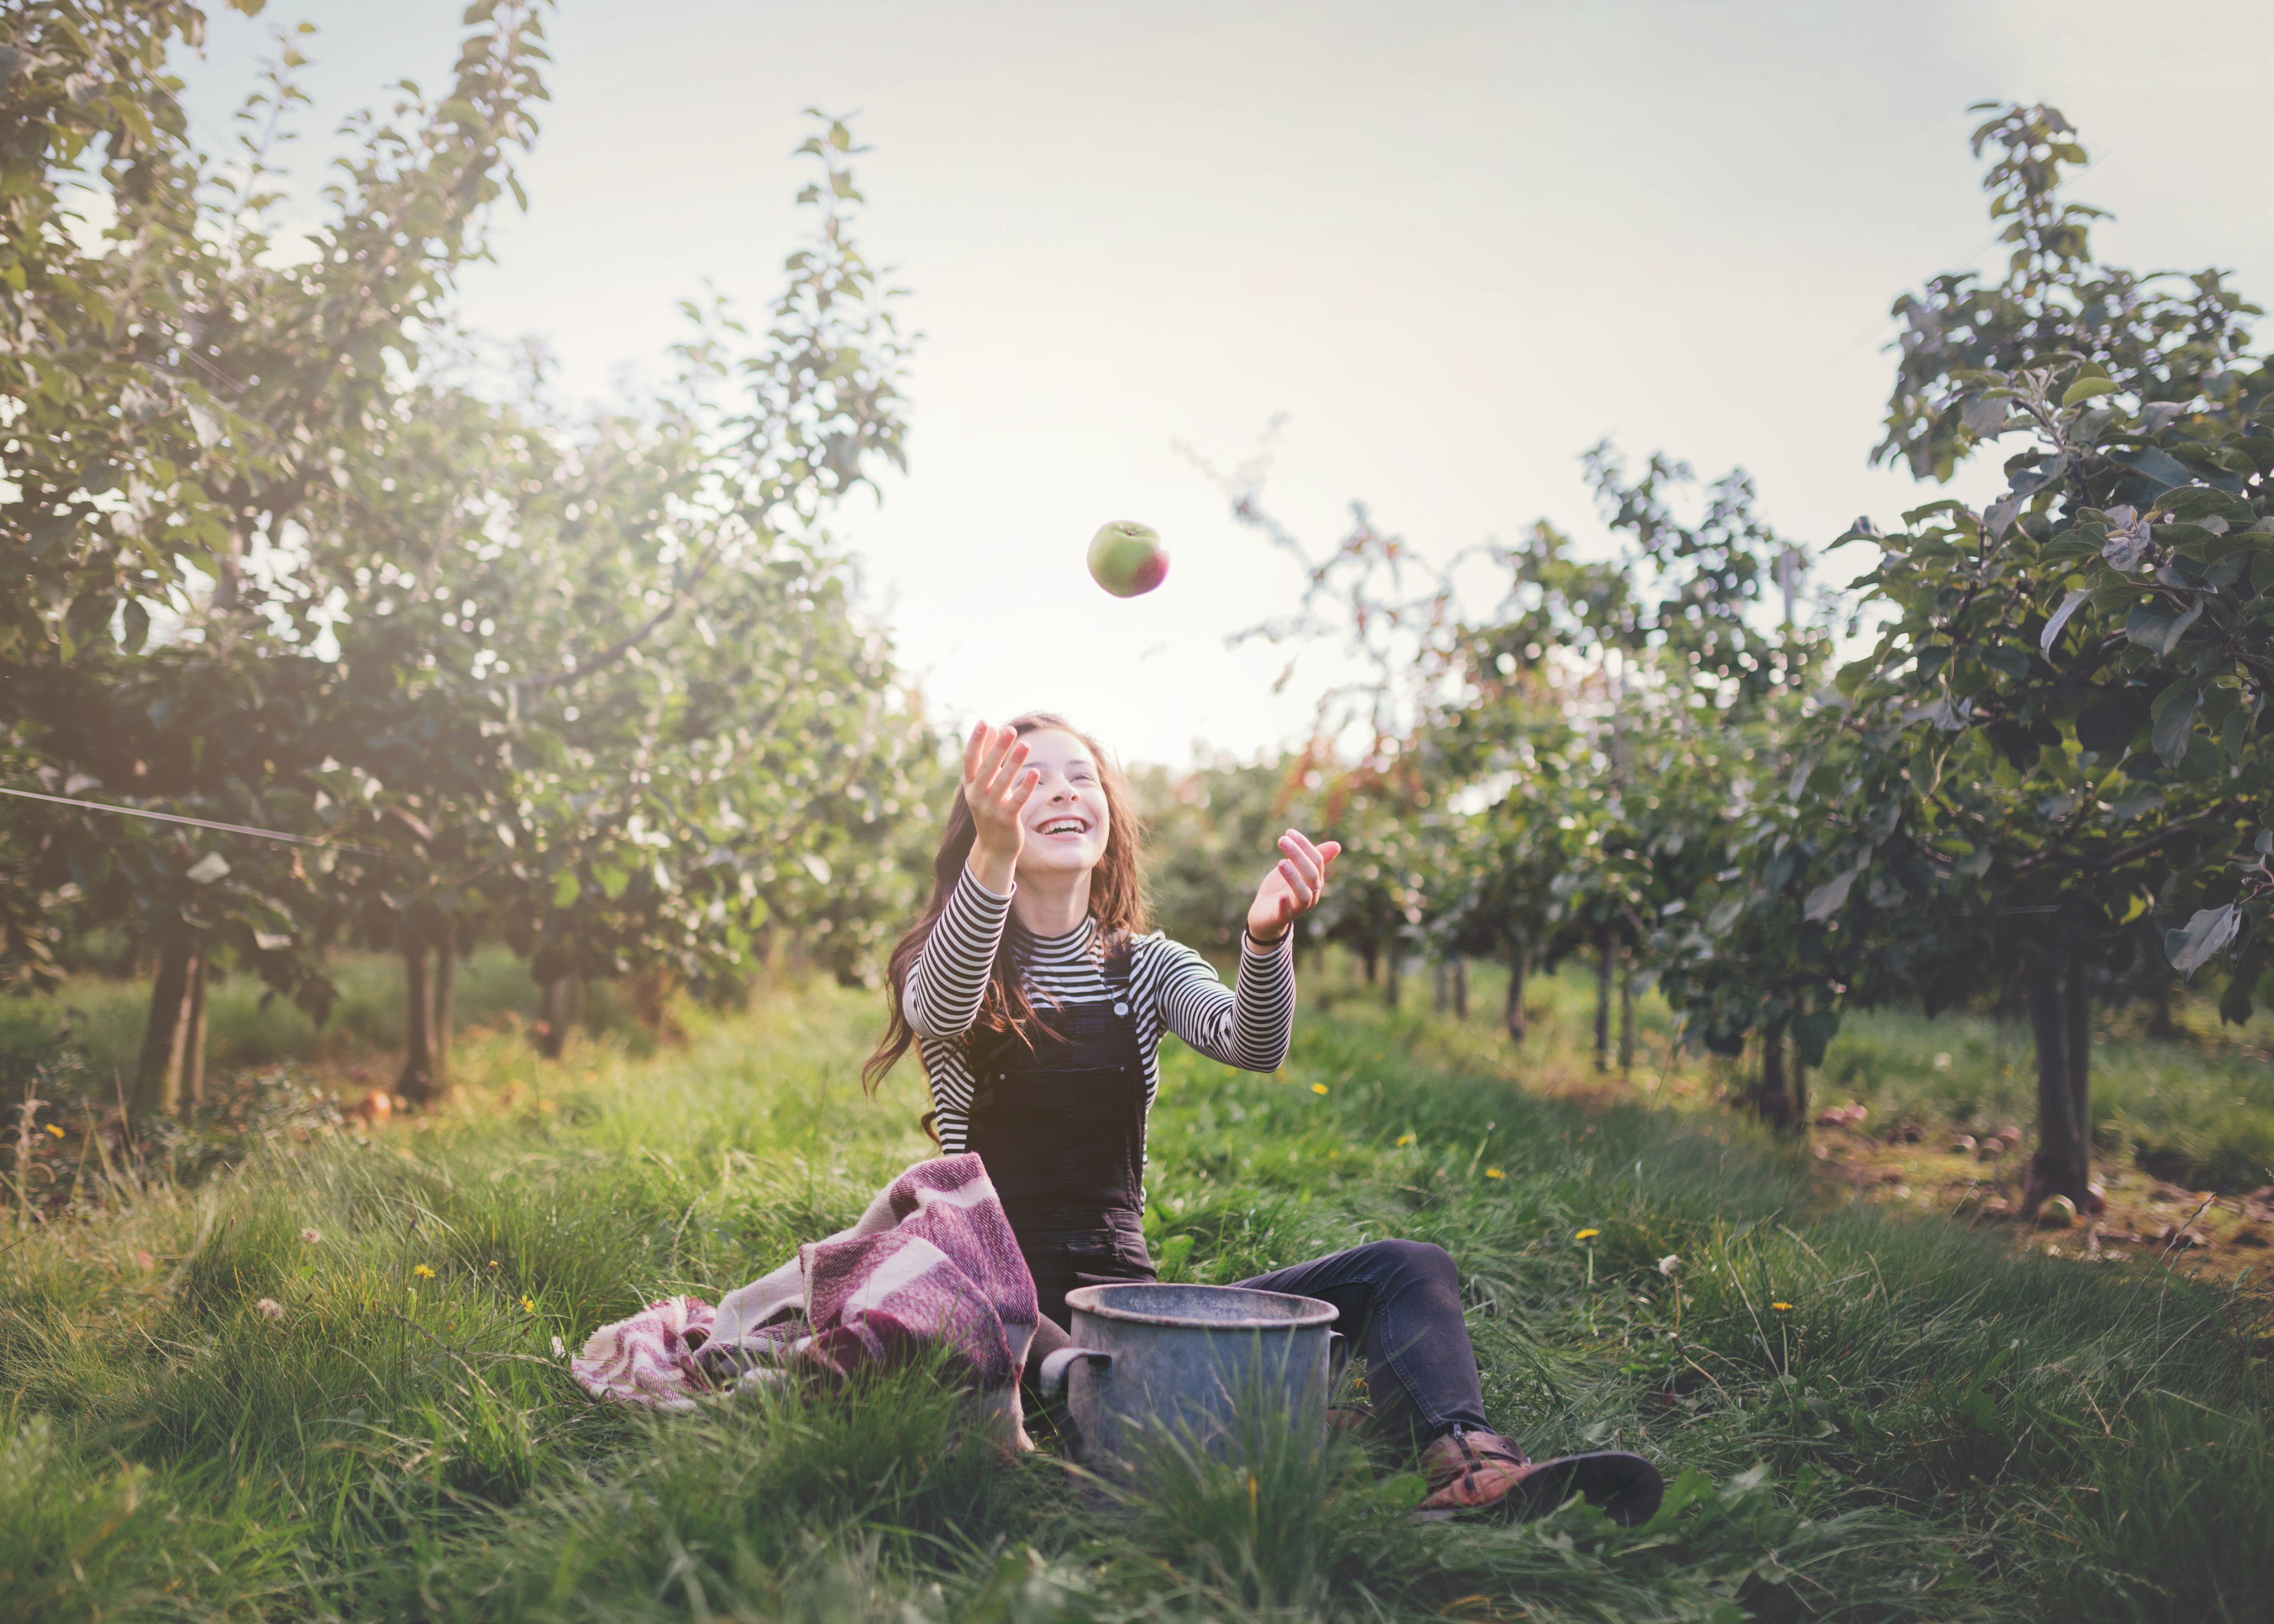 Girl in orchard cathching apple